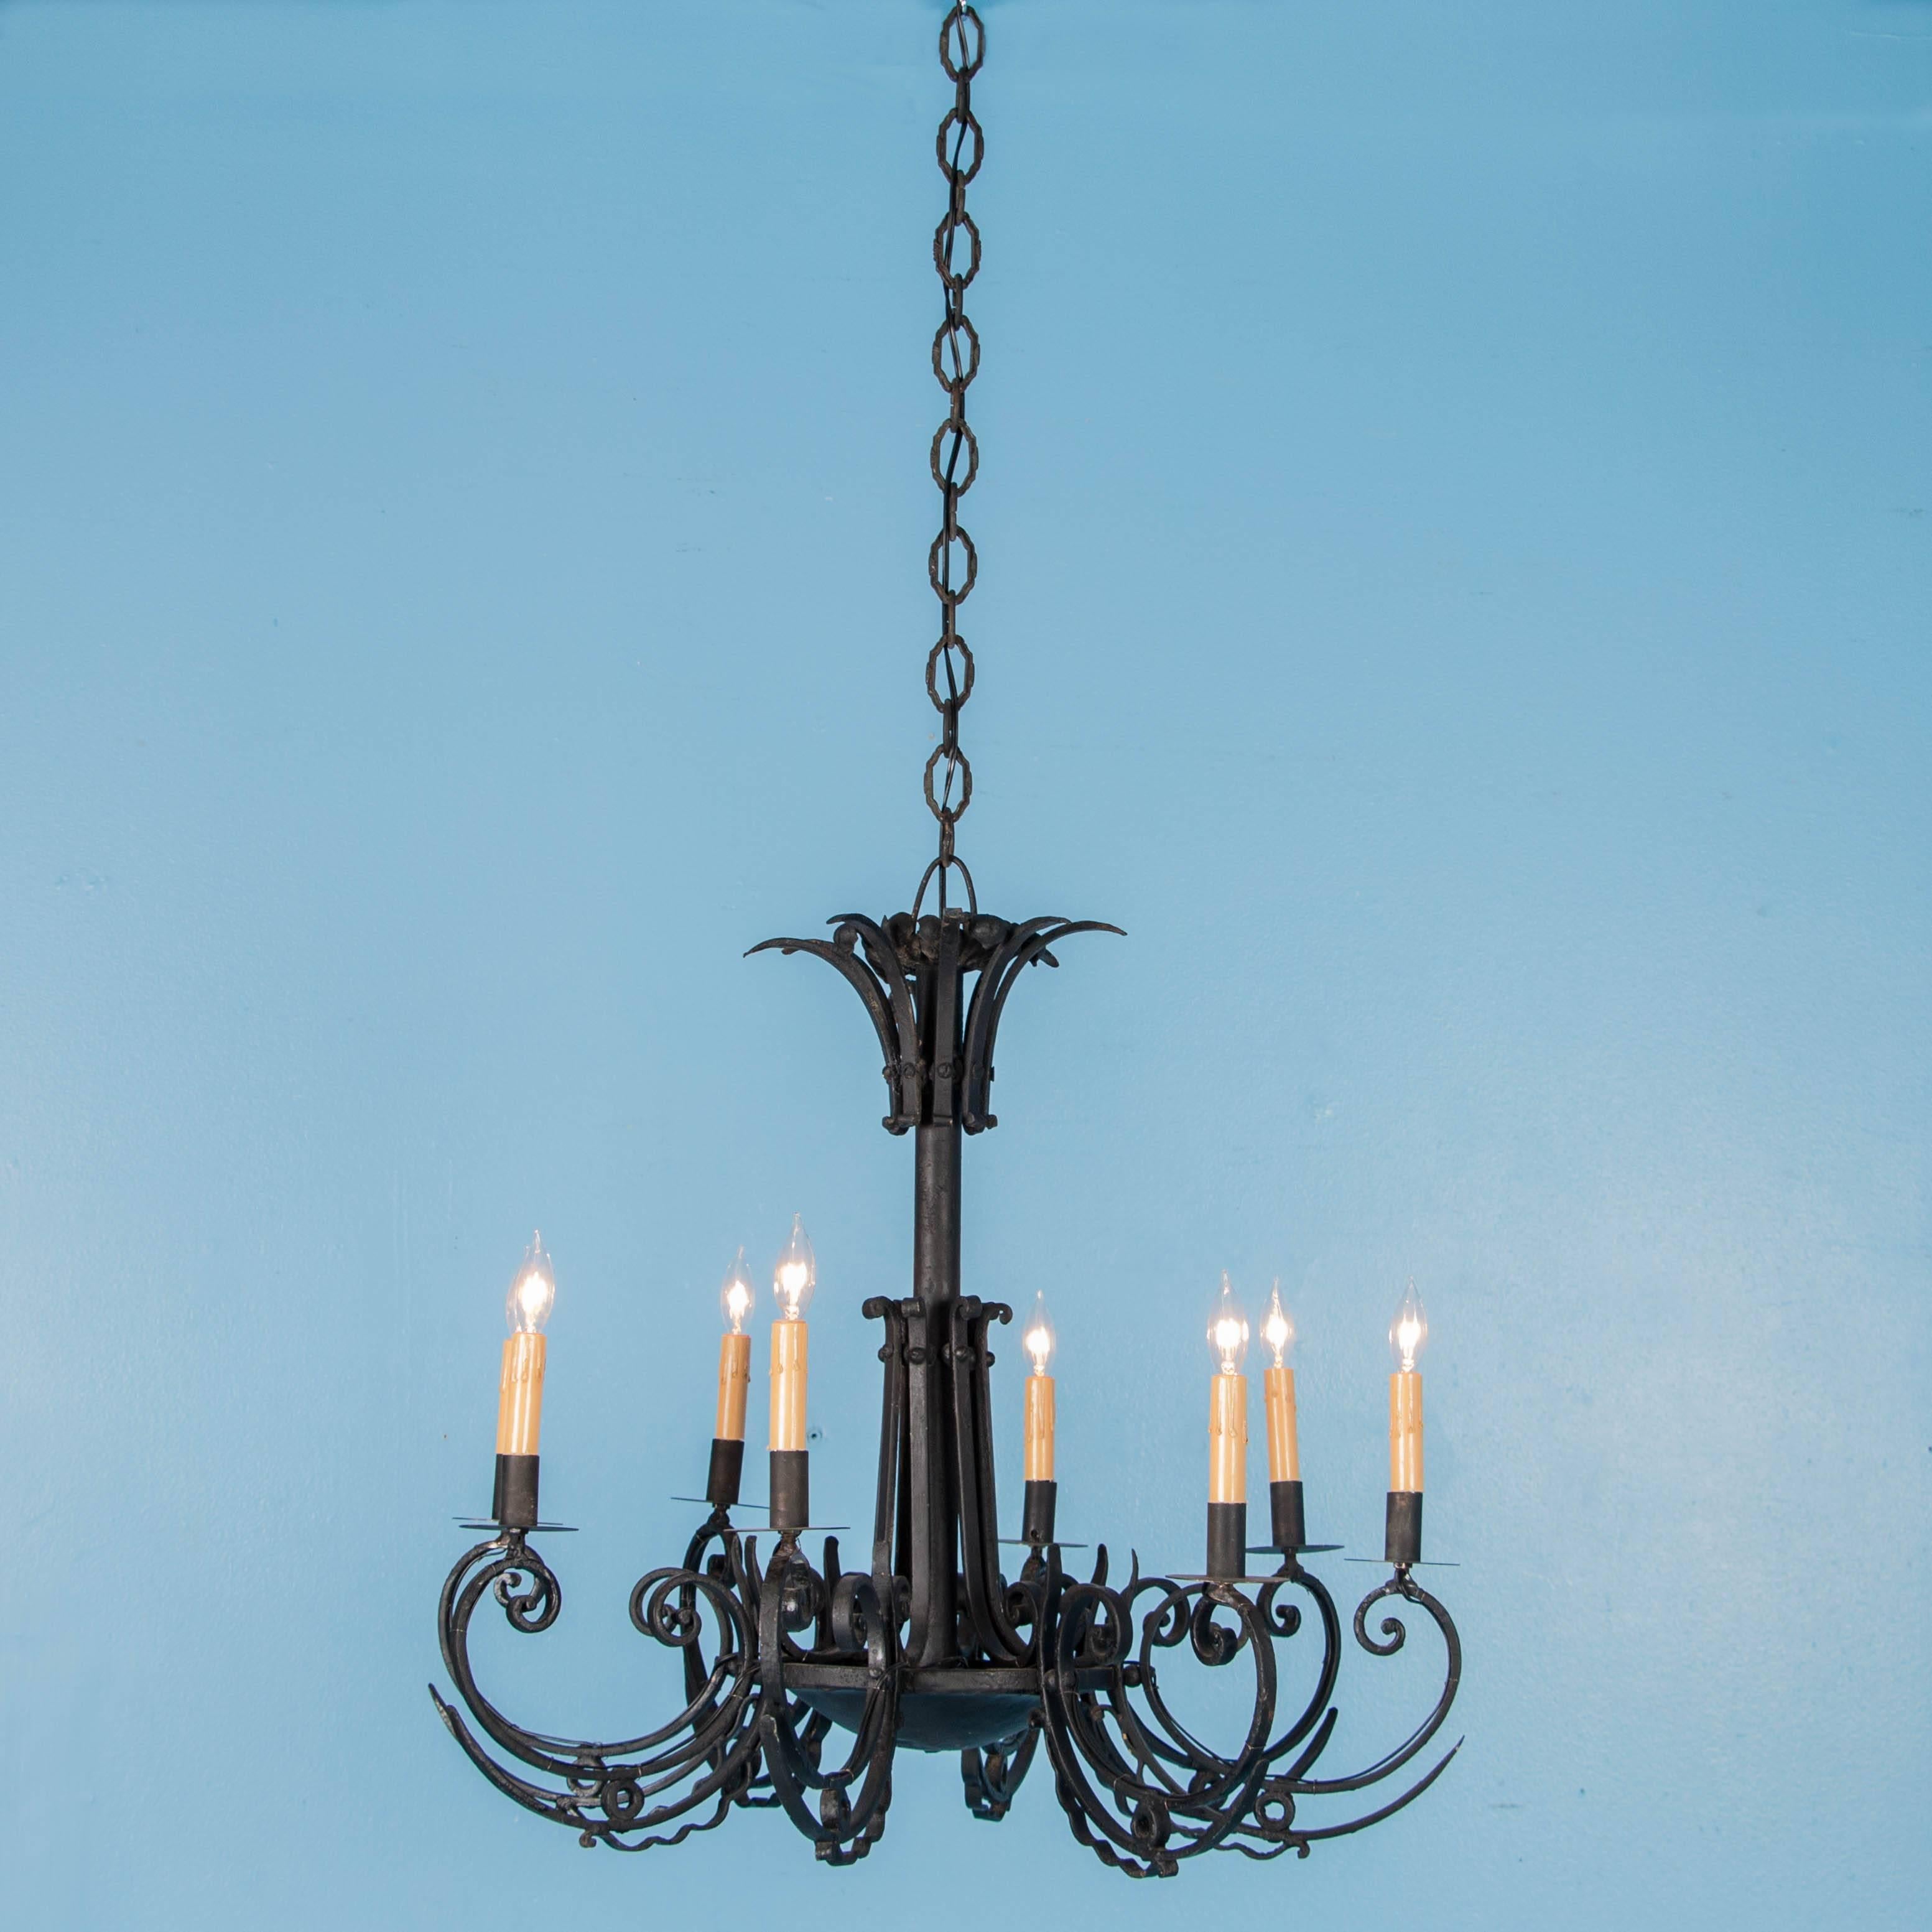 This antique French chandelier (circa 1920), features eight ornate wrought iron arms, each set with a single light and a candle cover resting on a drip pan. Notice how below each of the scrolled arms there are 2 layers of curved iron, one spiked and